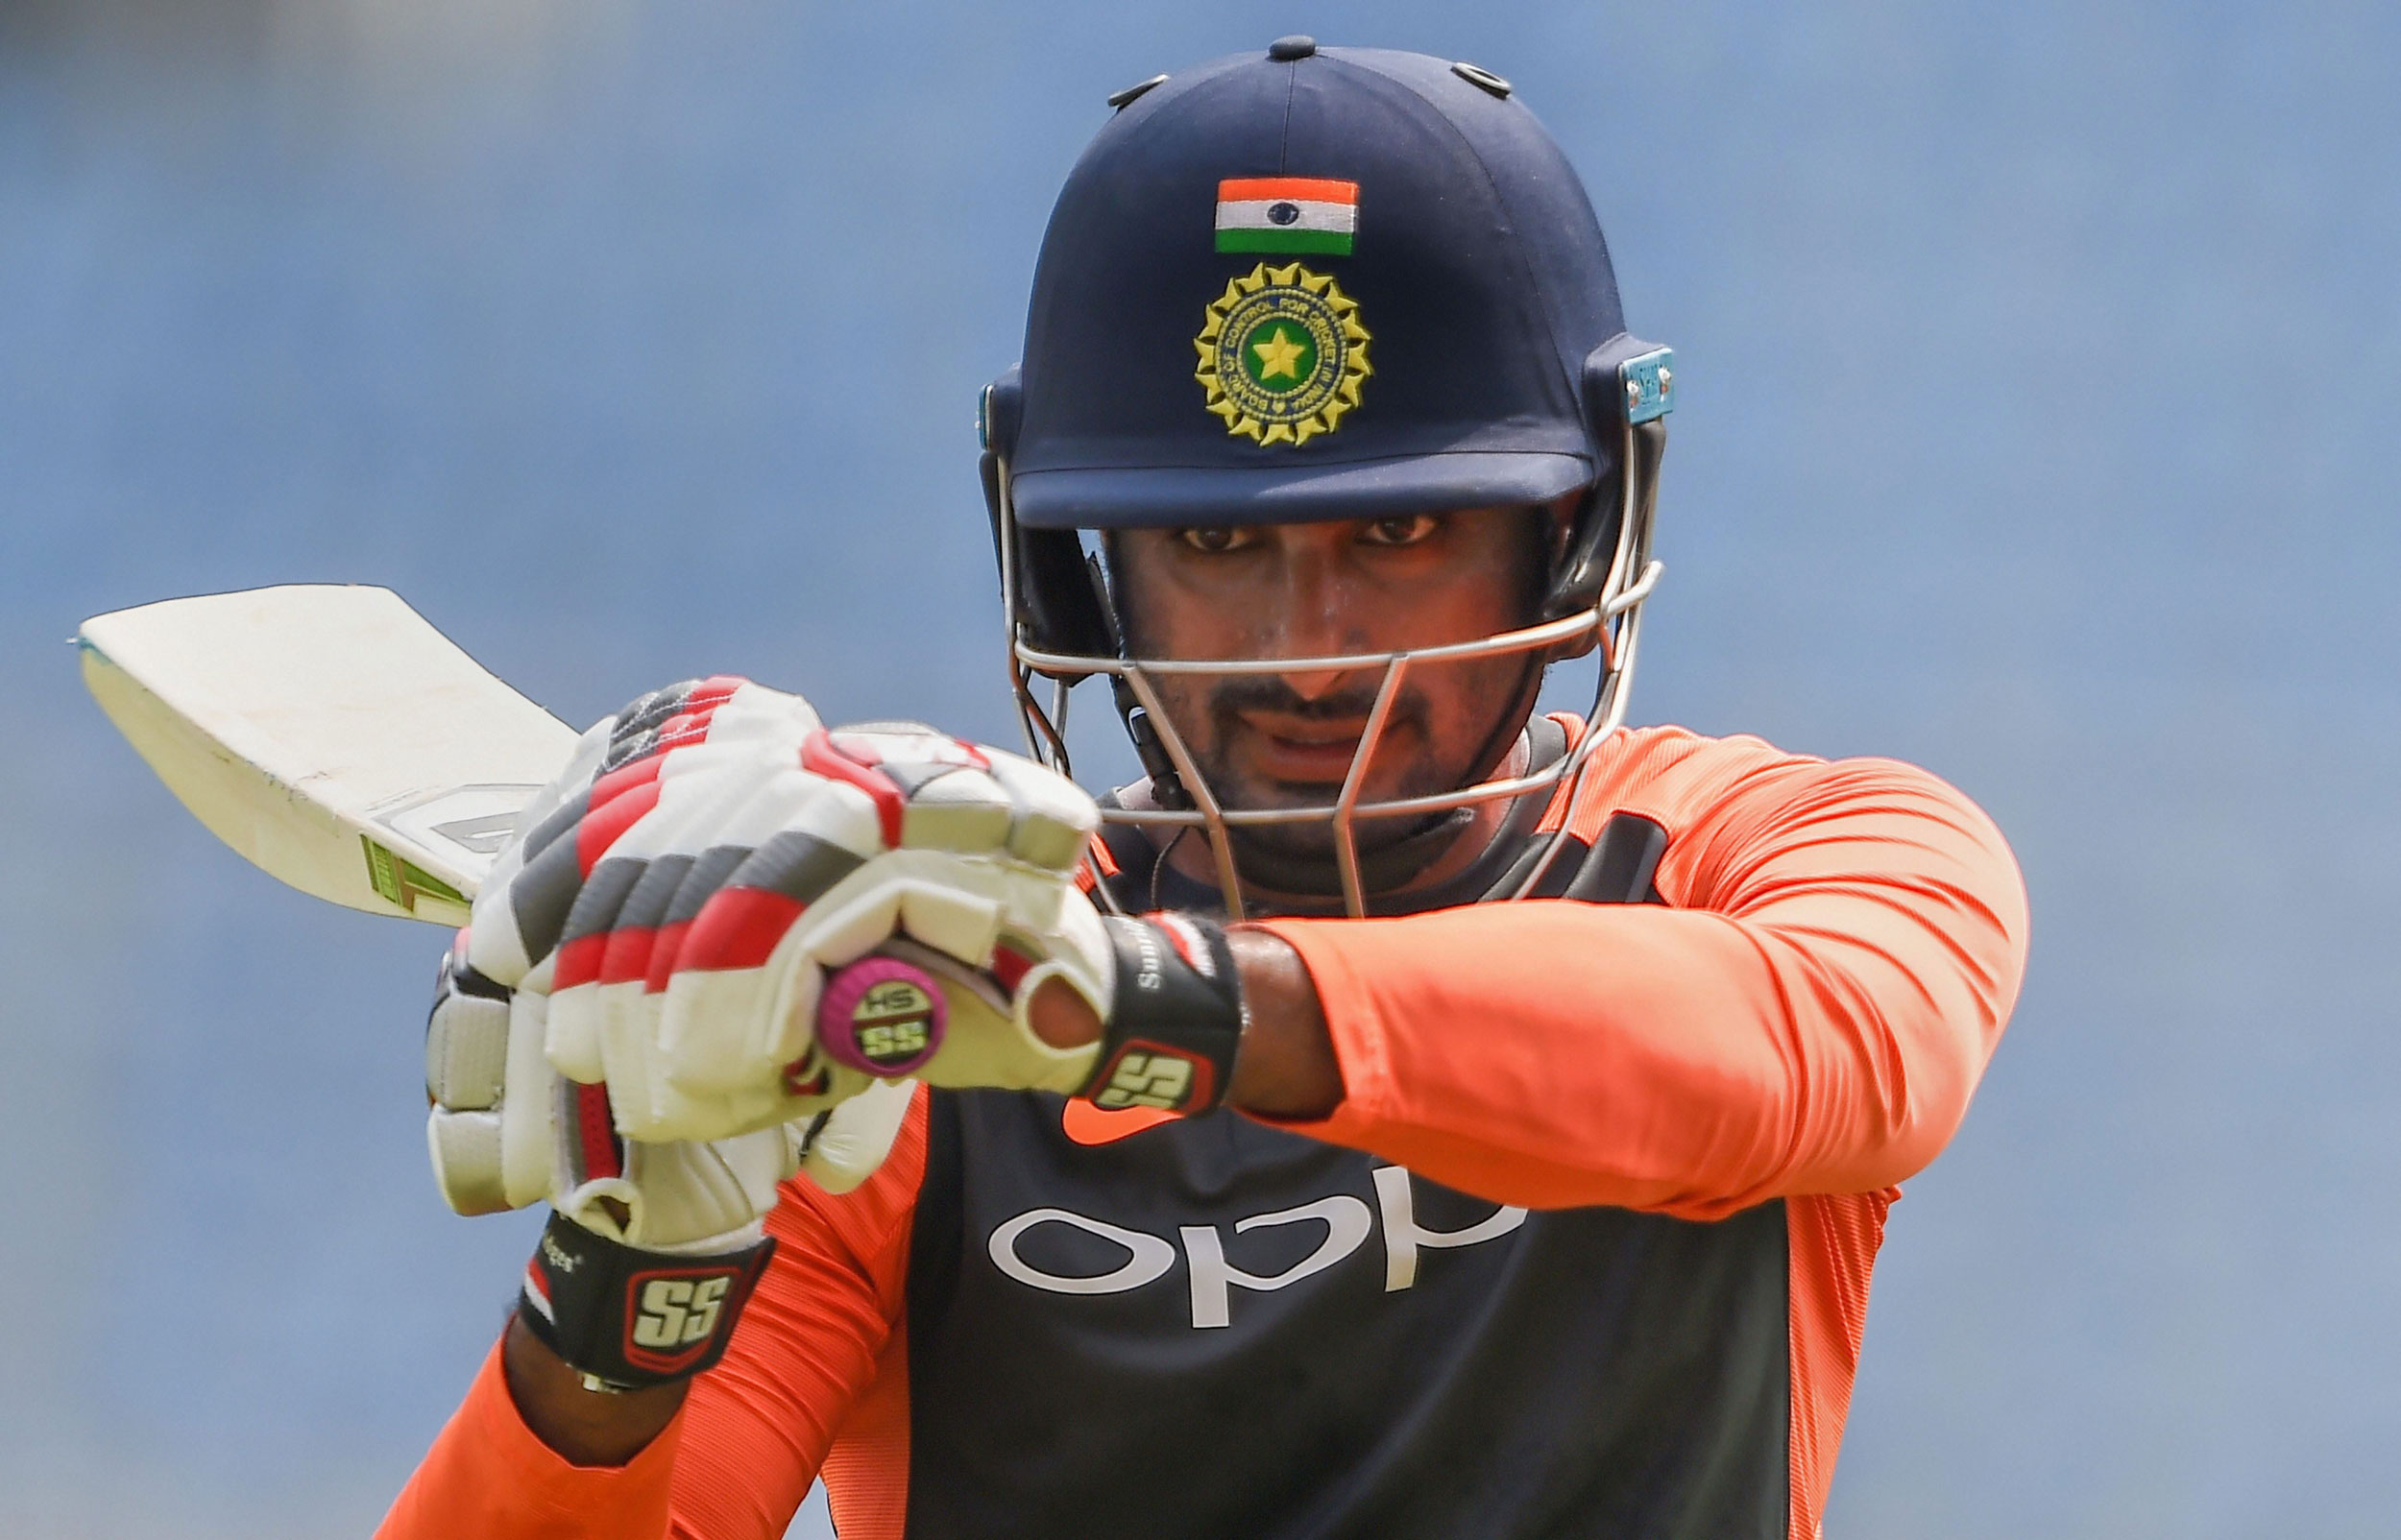 Ambati Rayudu (in picture) was in the official standby list for the big event in the UK, but was ignored despite injury to all-rounder Vijay Shankar. Opener Mayank Agrawal was brought in on the team management's insistence.

